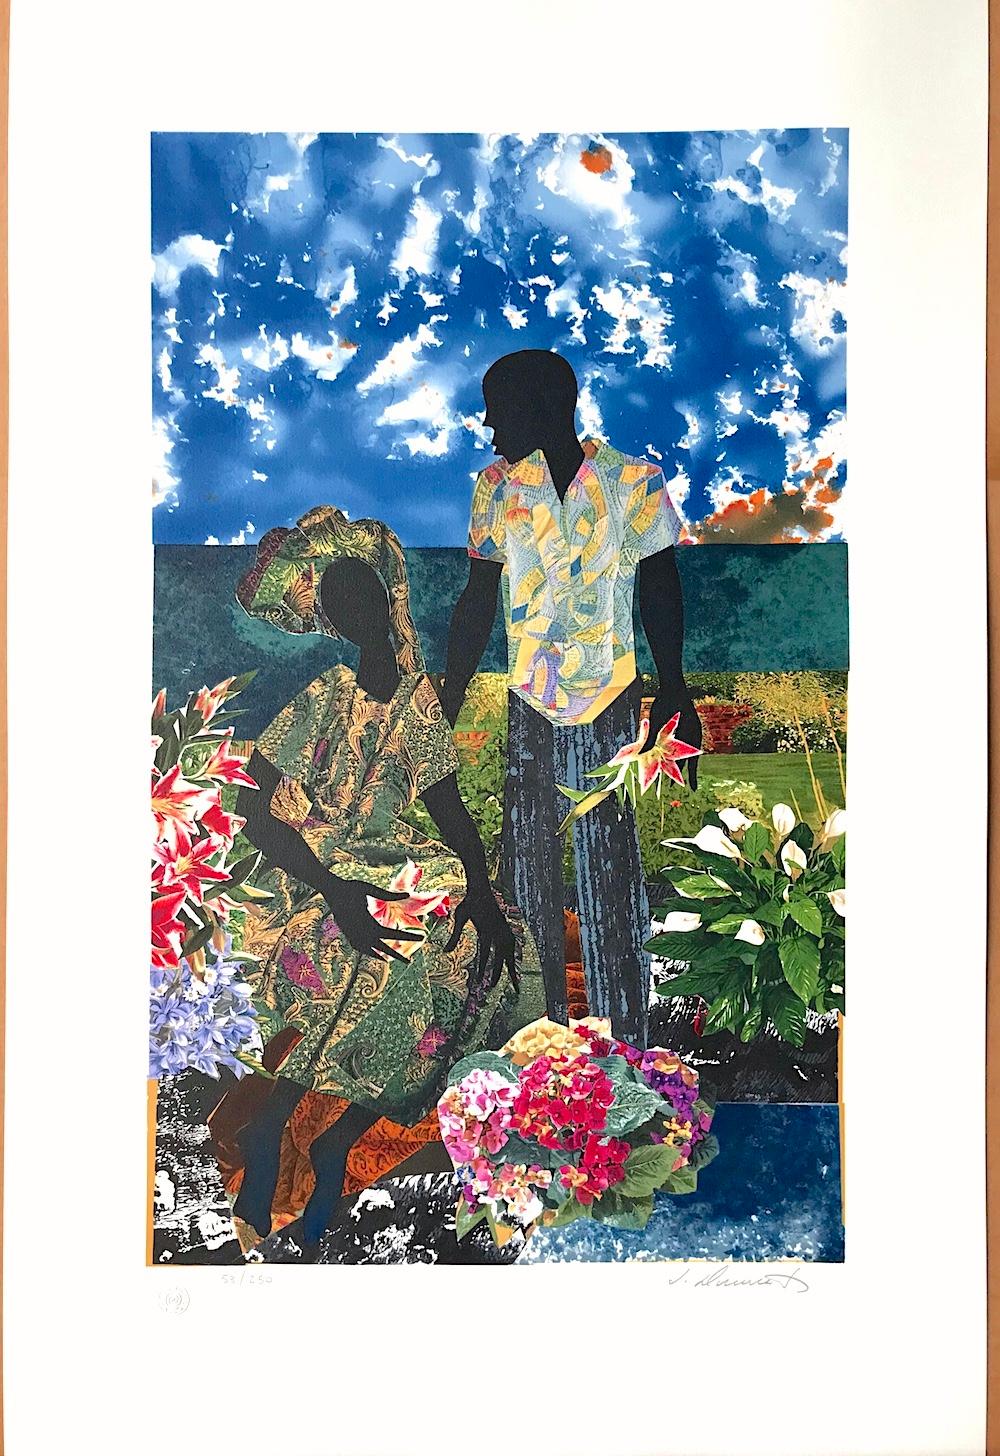 GARDEN ROMANCE by the artist James Denmark is an original hand drawn, limited edition lithograph(not a photo reproduction or digital print) printed on archival Somerset paper using traditional hand lithography techniques. GARDEN ROMANCE is one of